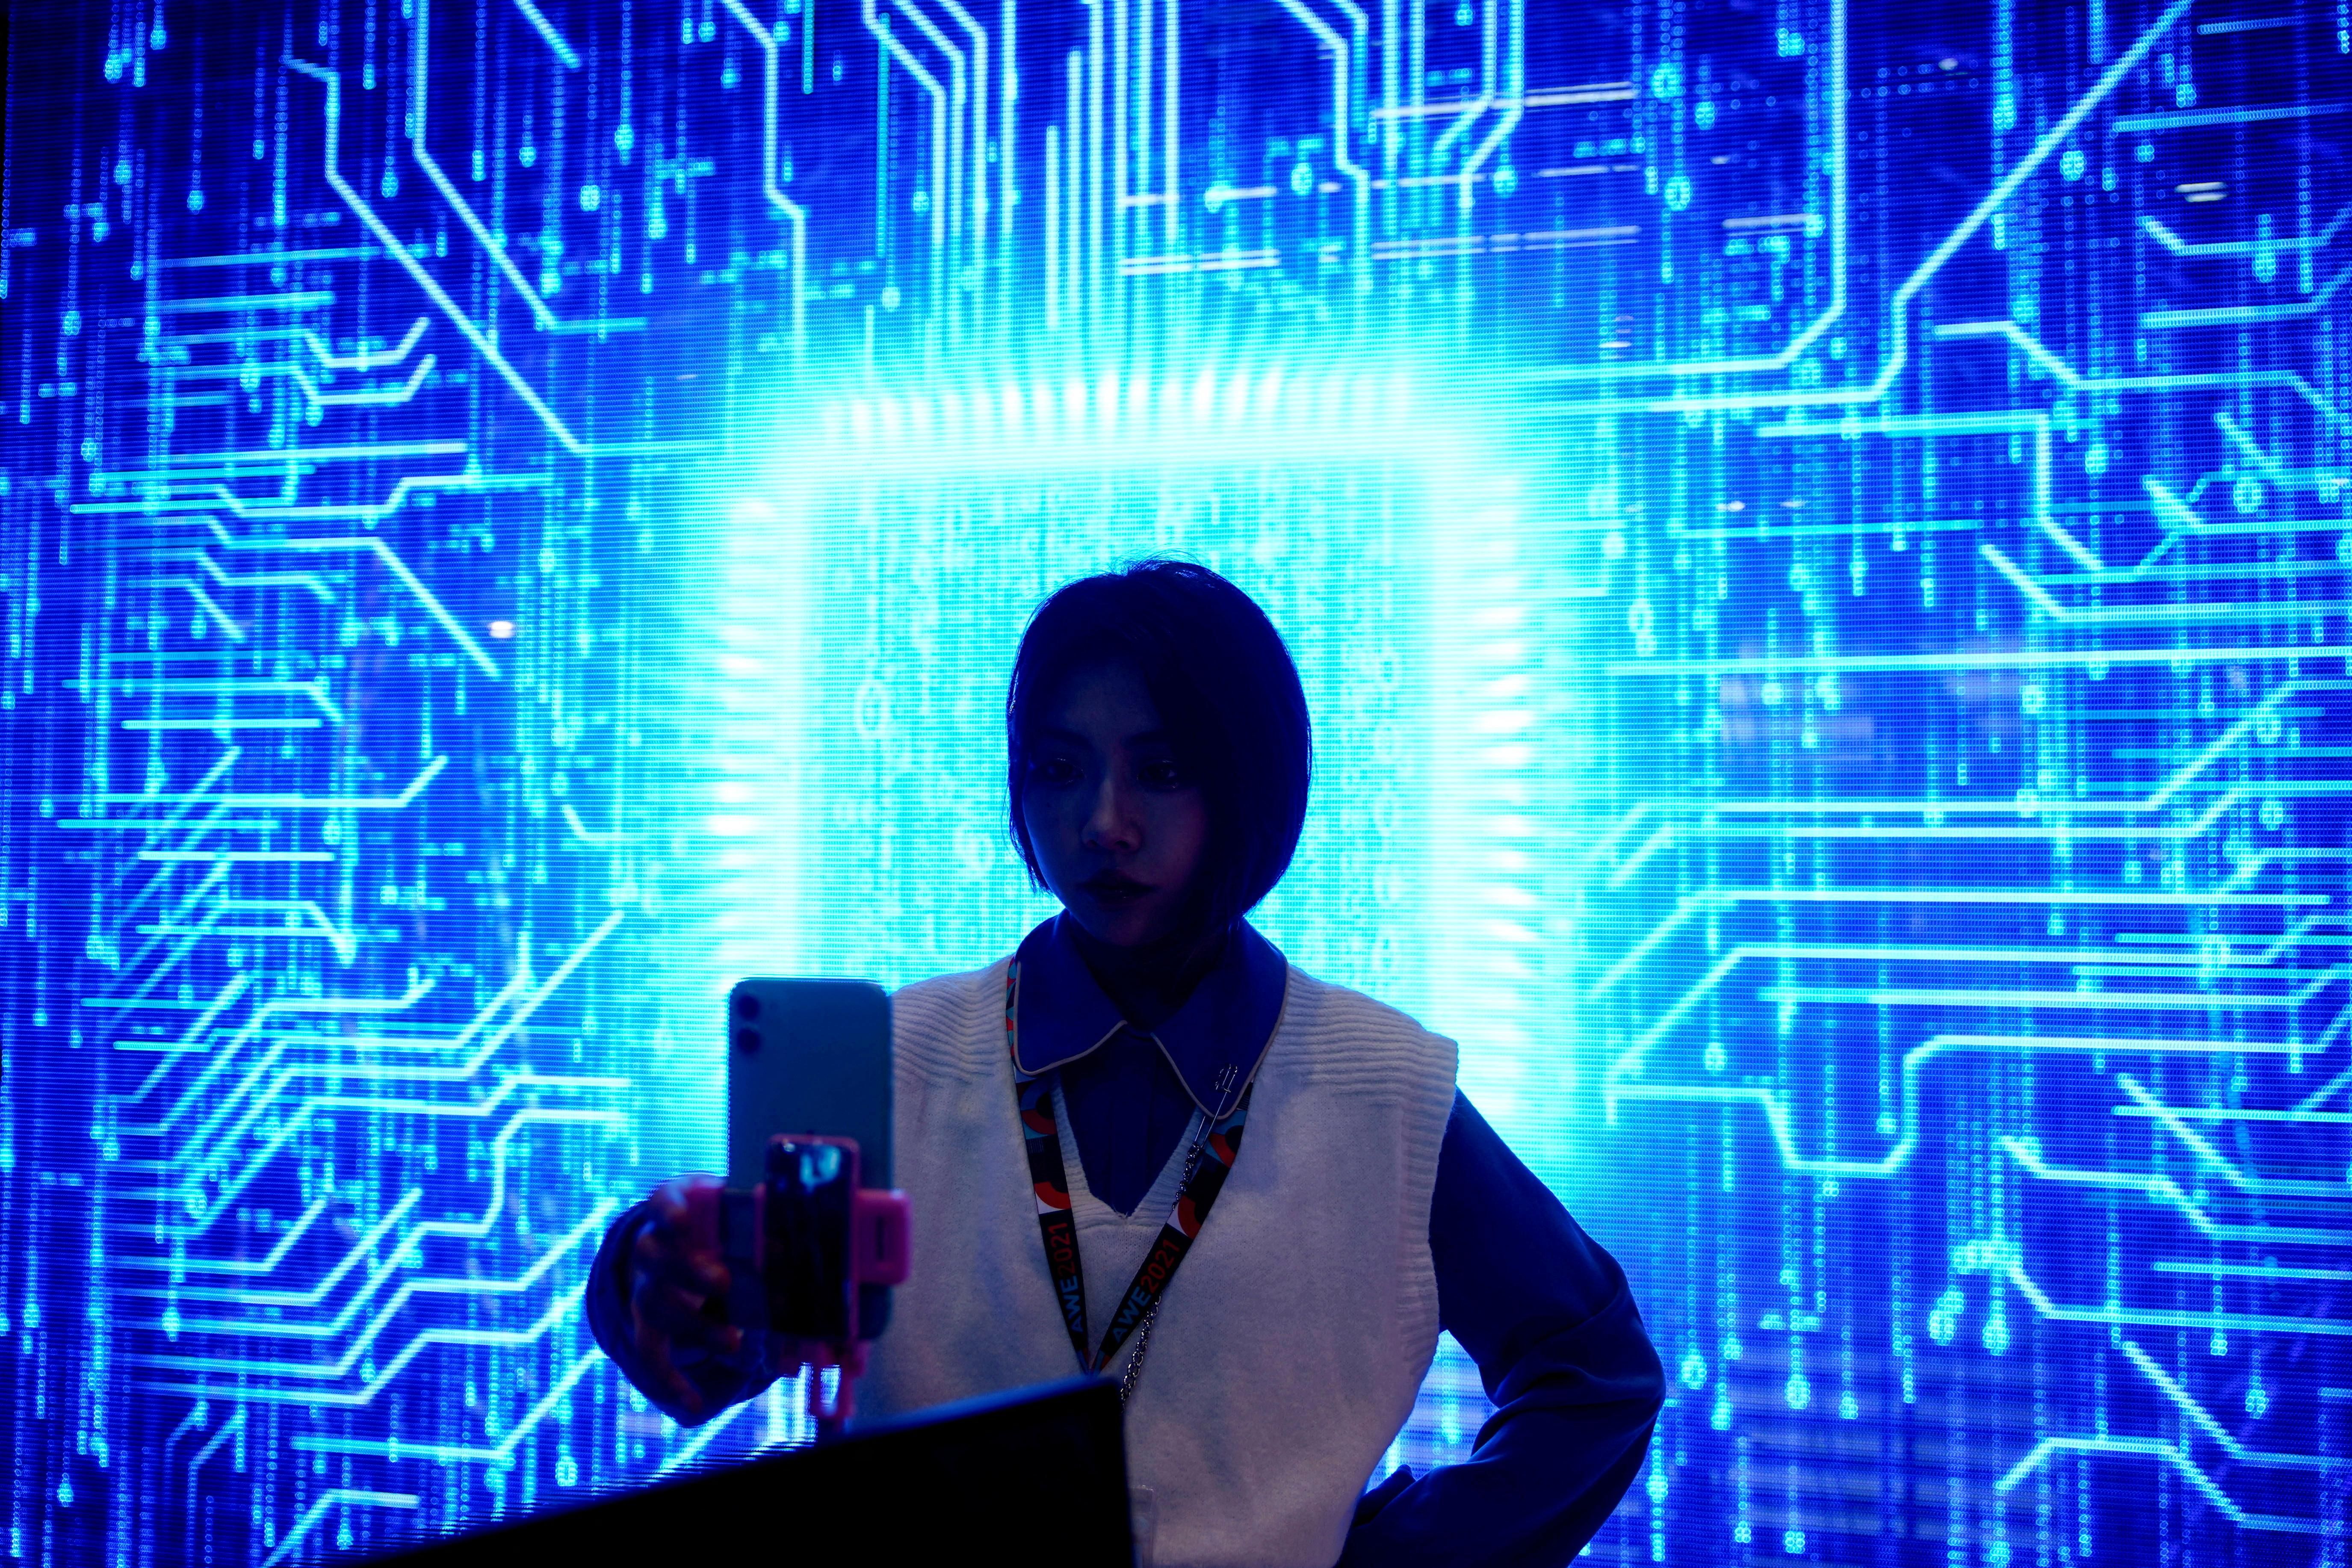 A woman visits a semiconductor device display in Shanghai, China.